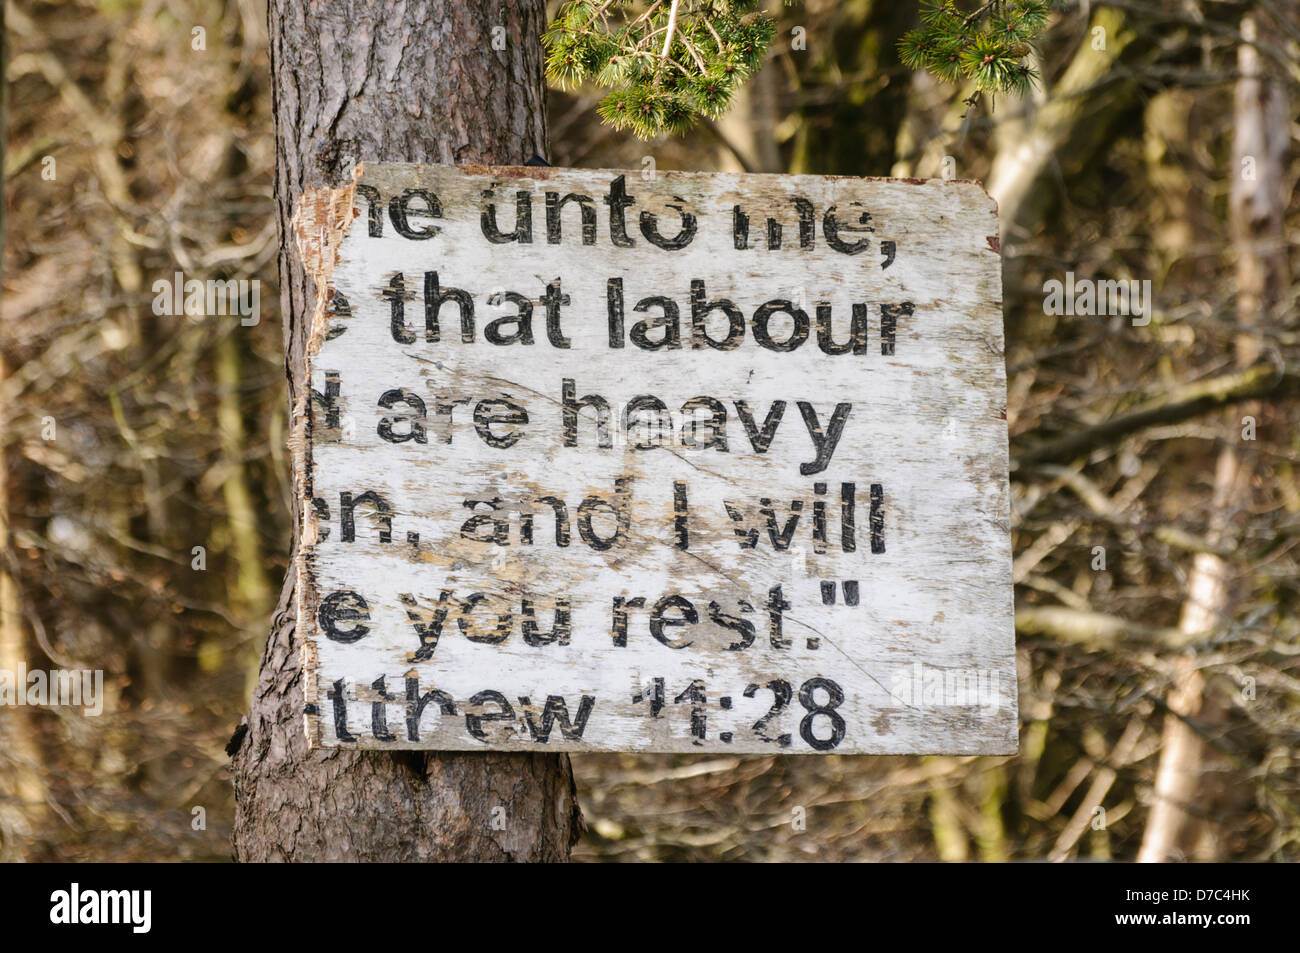 Broken religious sign typical of many erected in rural Protestant areas of Northern Ireland. Stock Photo